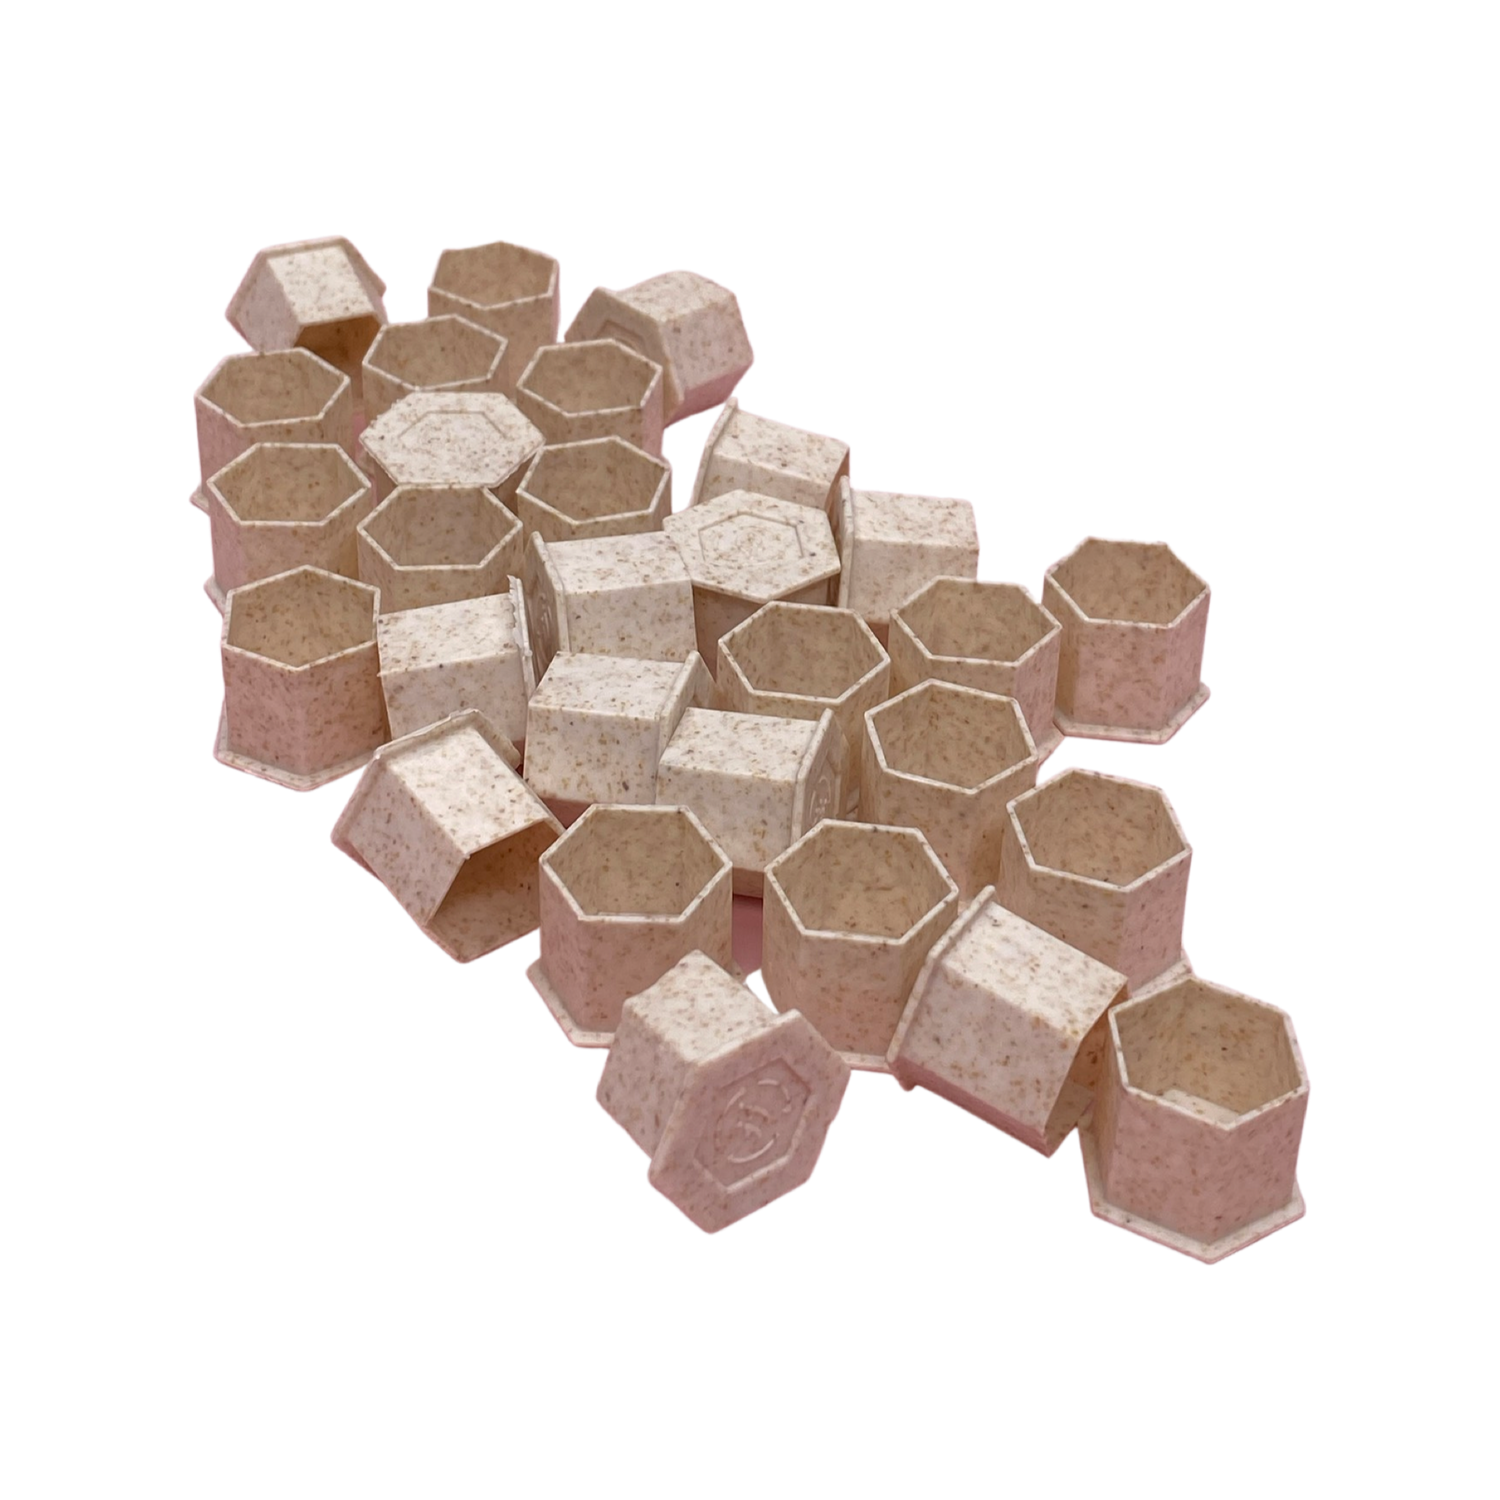 Beige coloured biodegradable pigment cups with a flat base. In a cluster. 